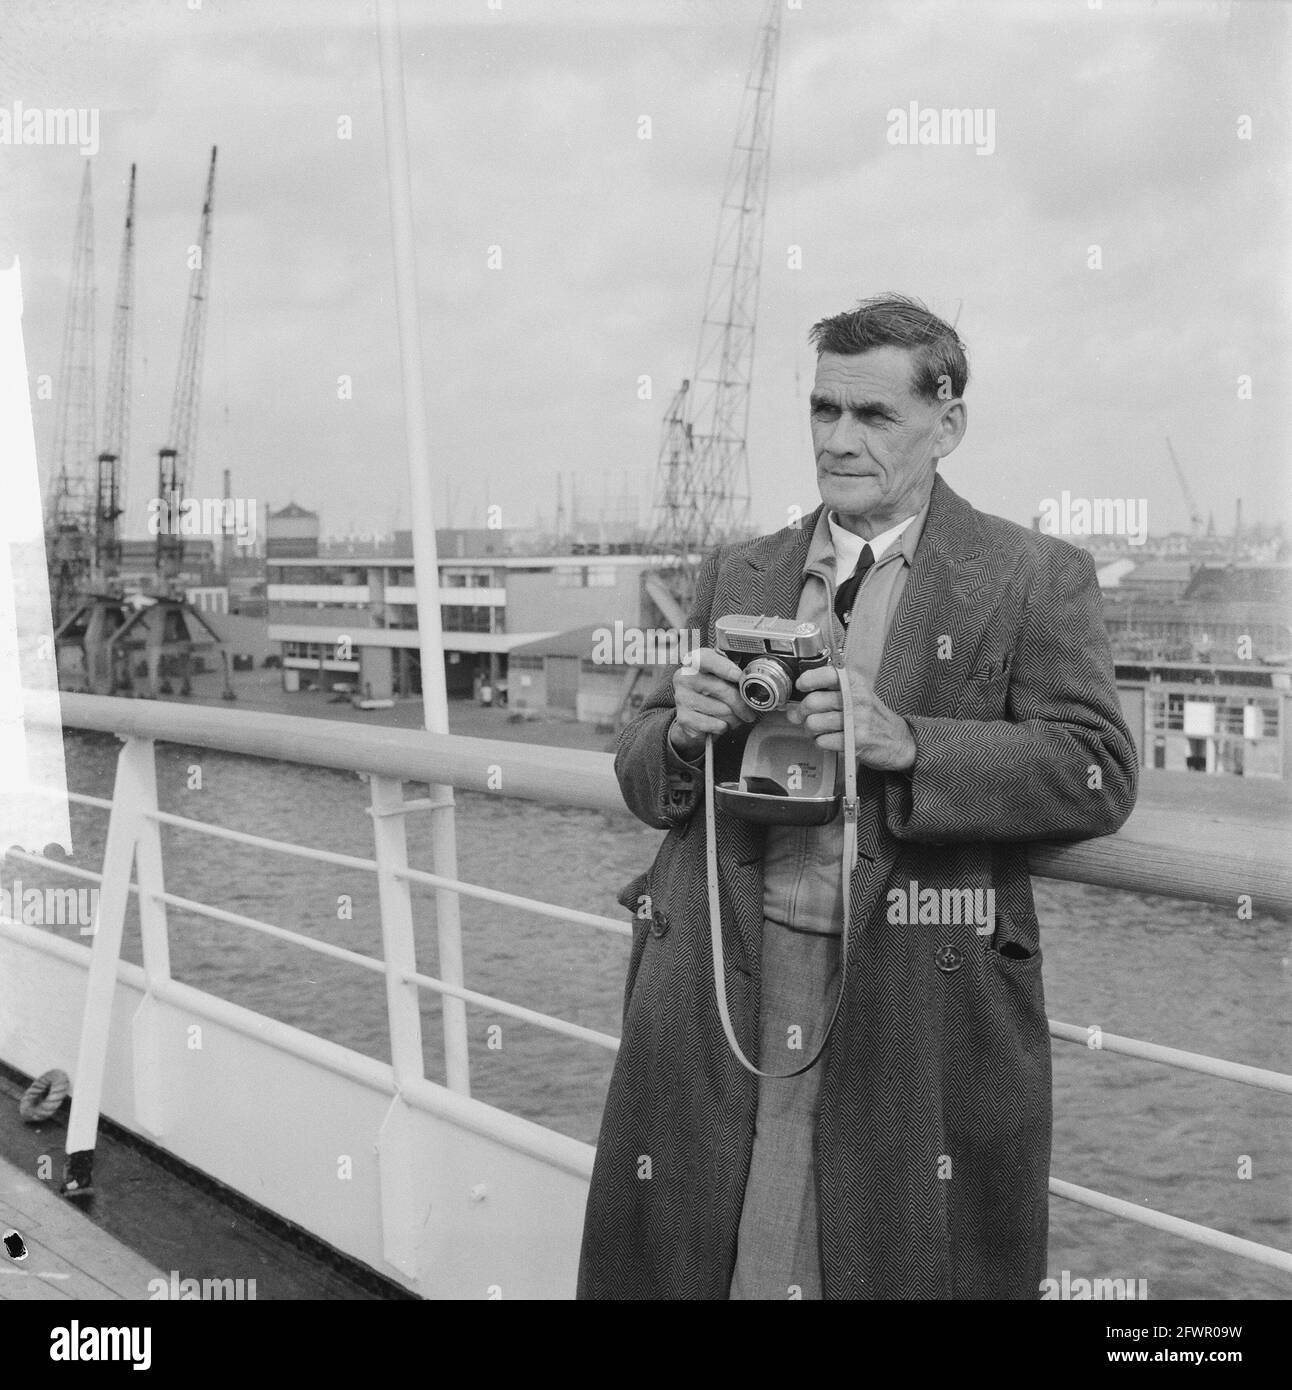 Mutineer in Rotterdam Fletcher Christian, May 19, 1962, The Netherlands, 20th century press agency photo, news to remember, documentary, historic photography 1945-1990, visual stories, human history of the Twentieth Century, capturing moments in time Stock Photo